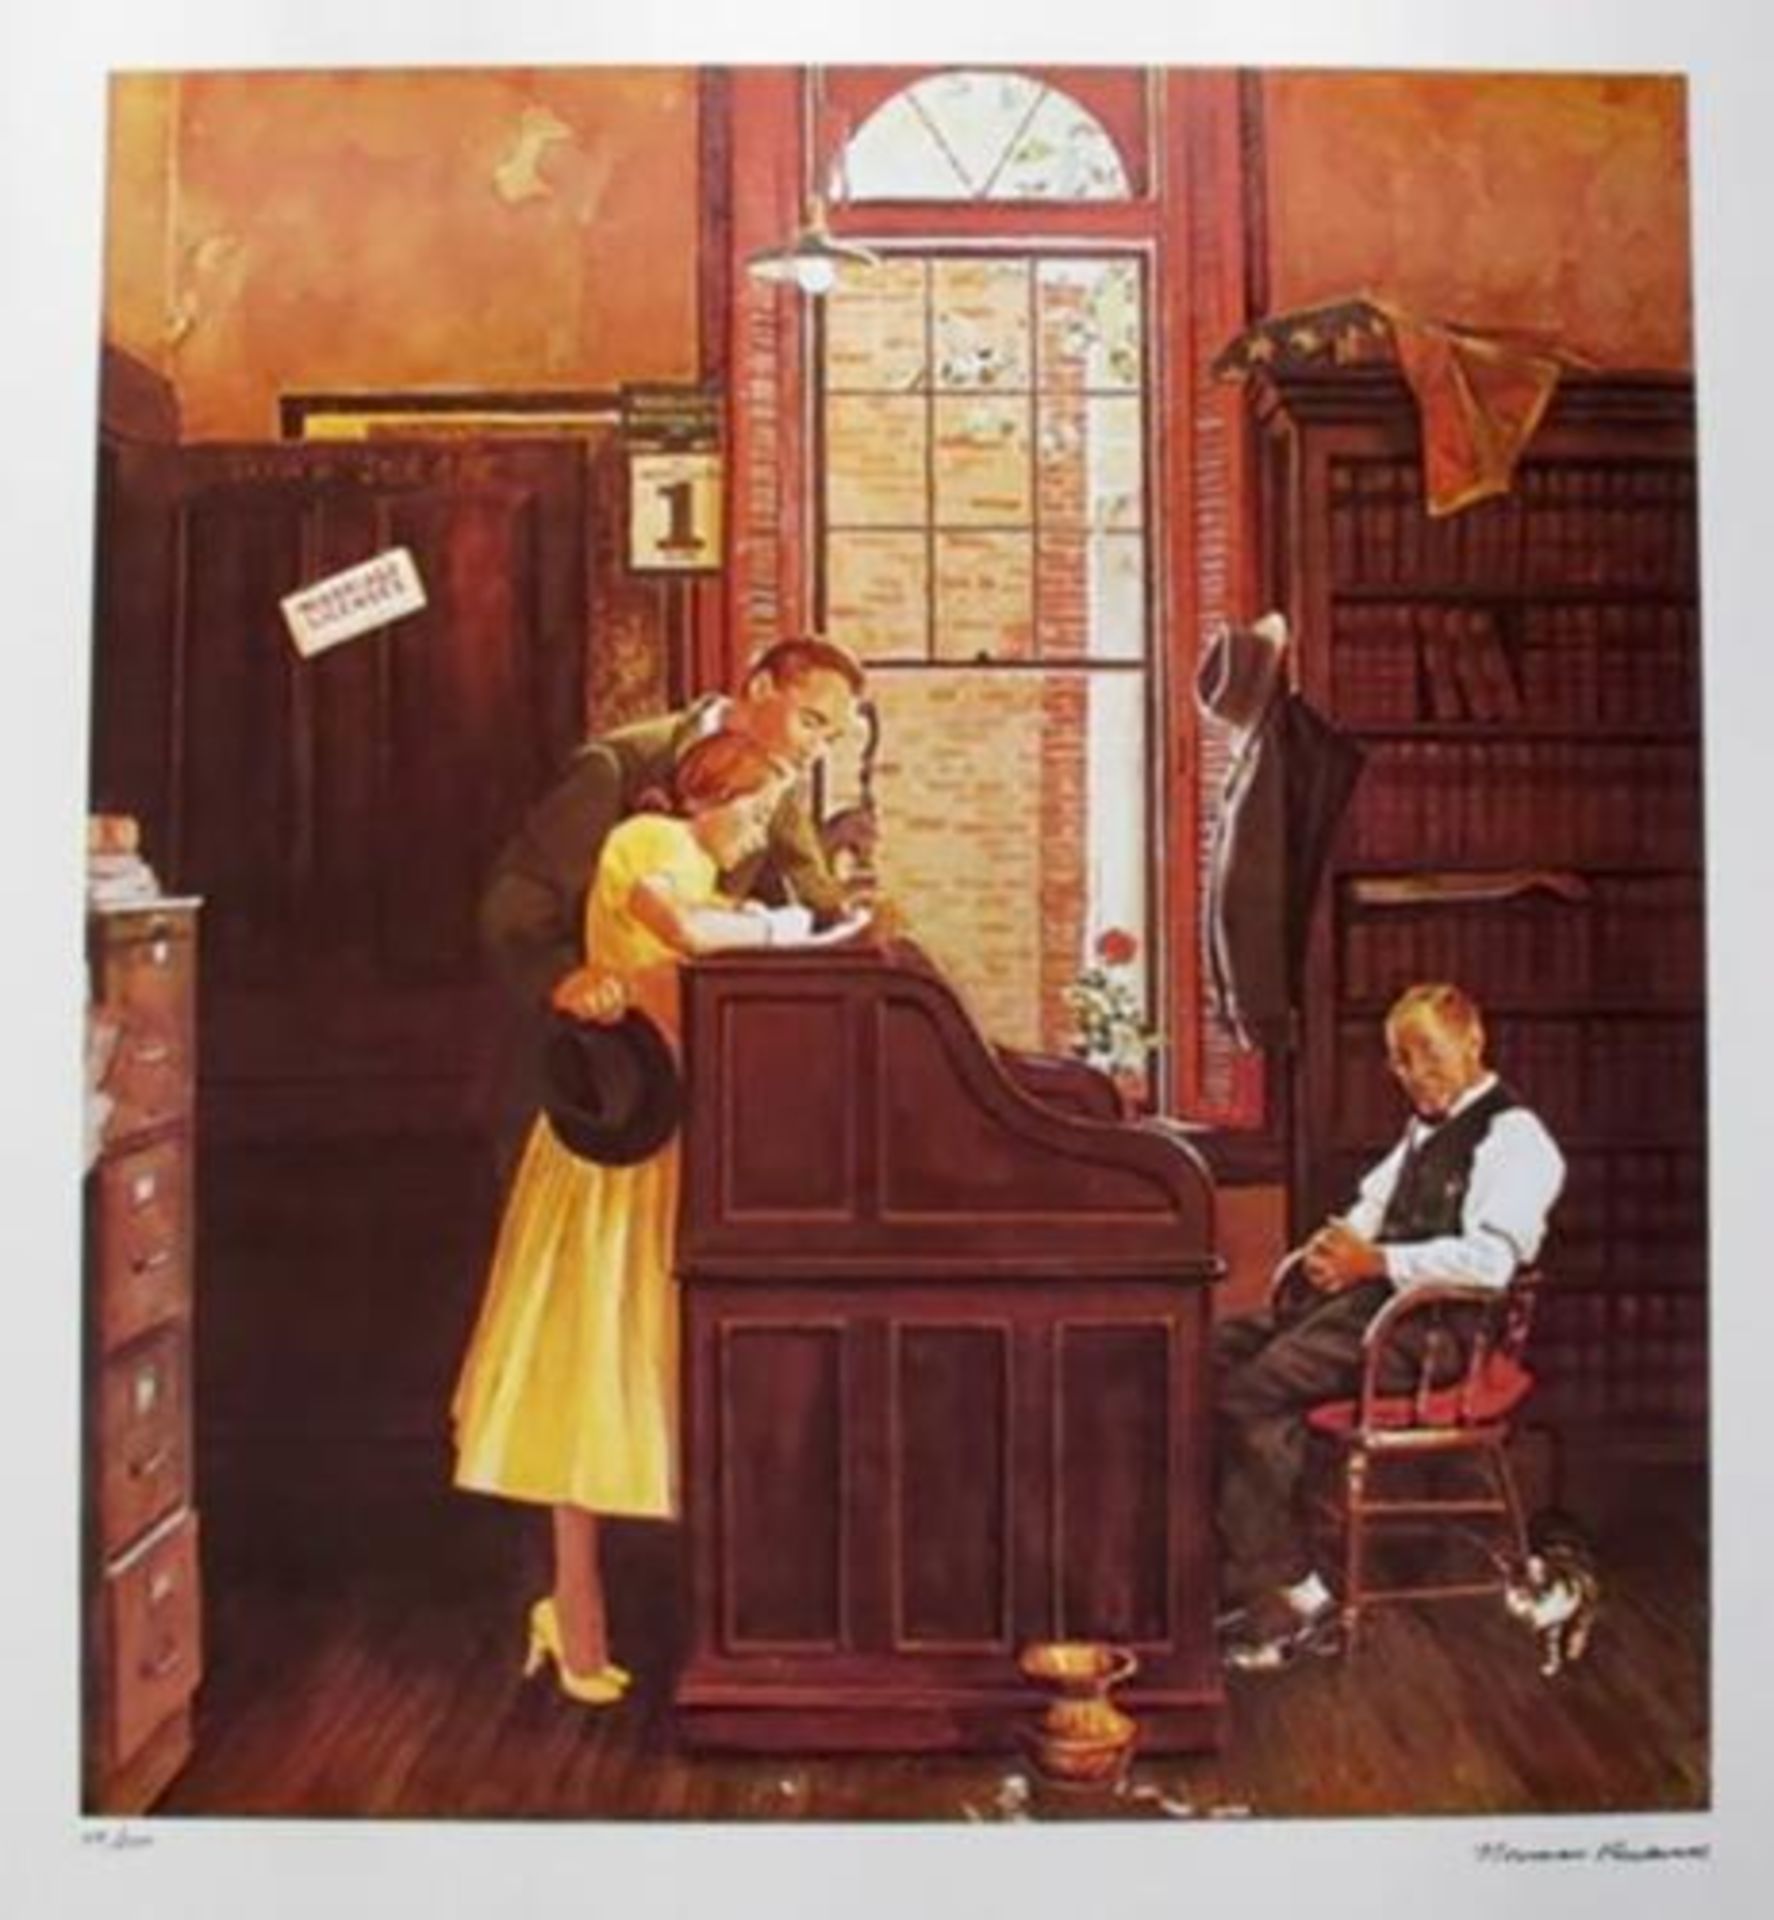 Norman Rockwell "Marriage Contract"